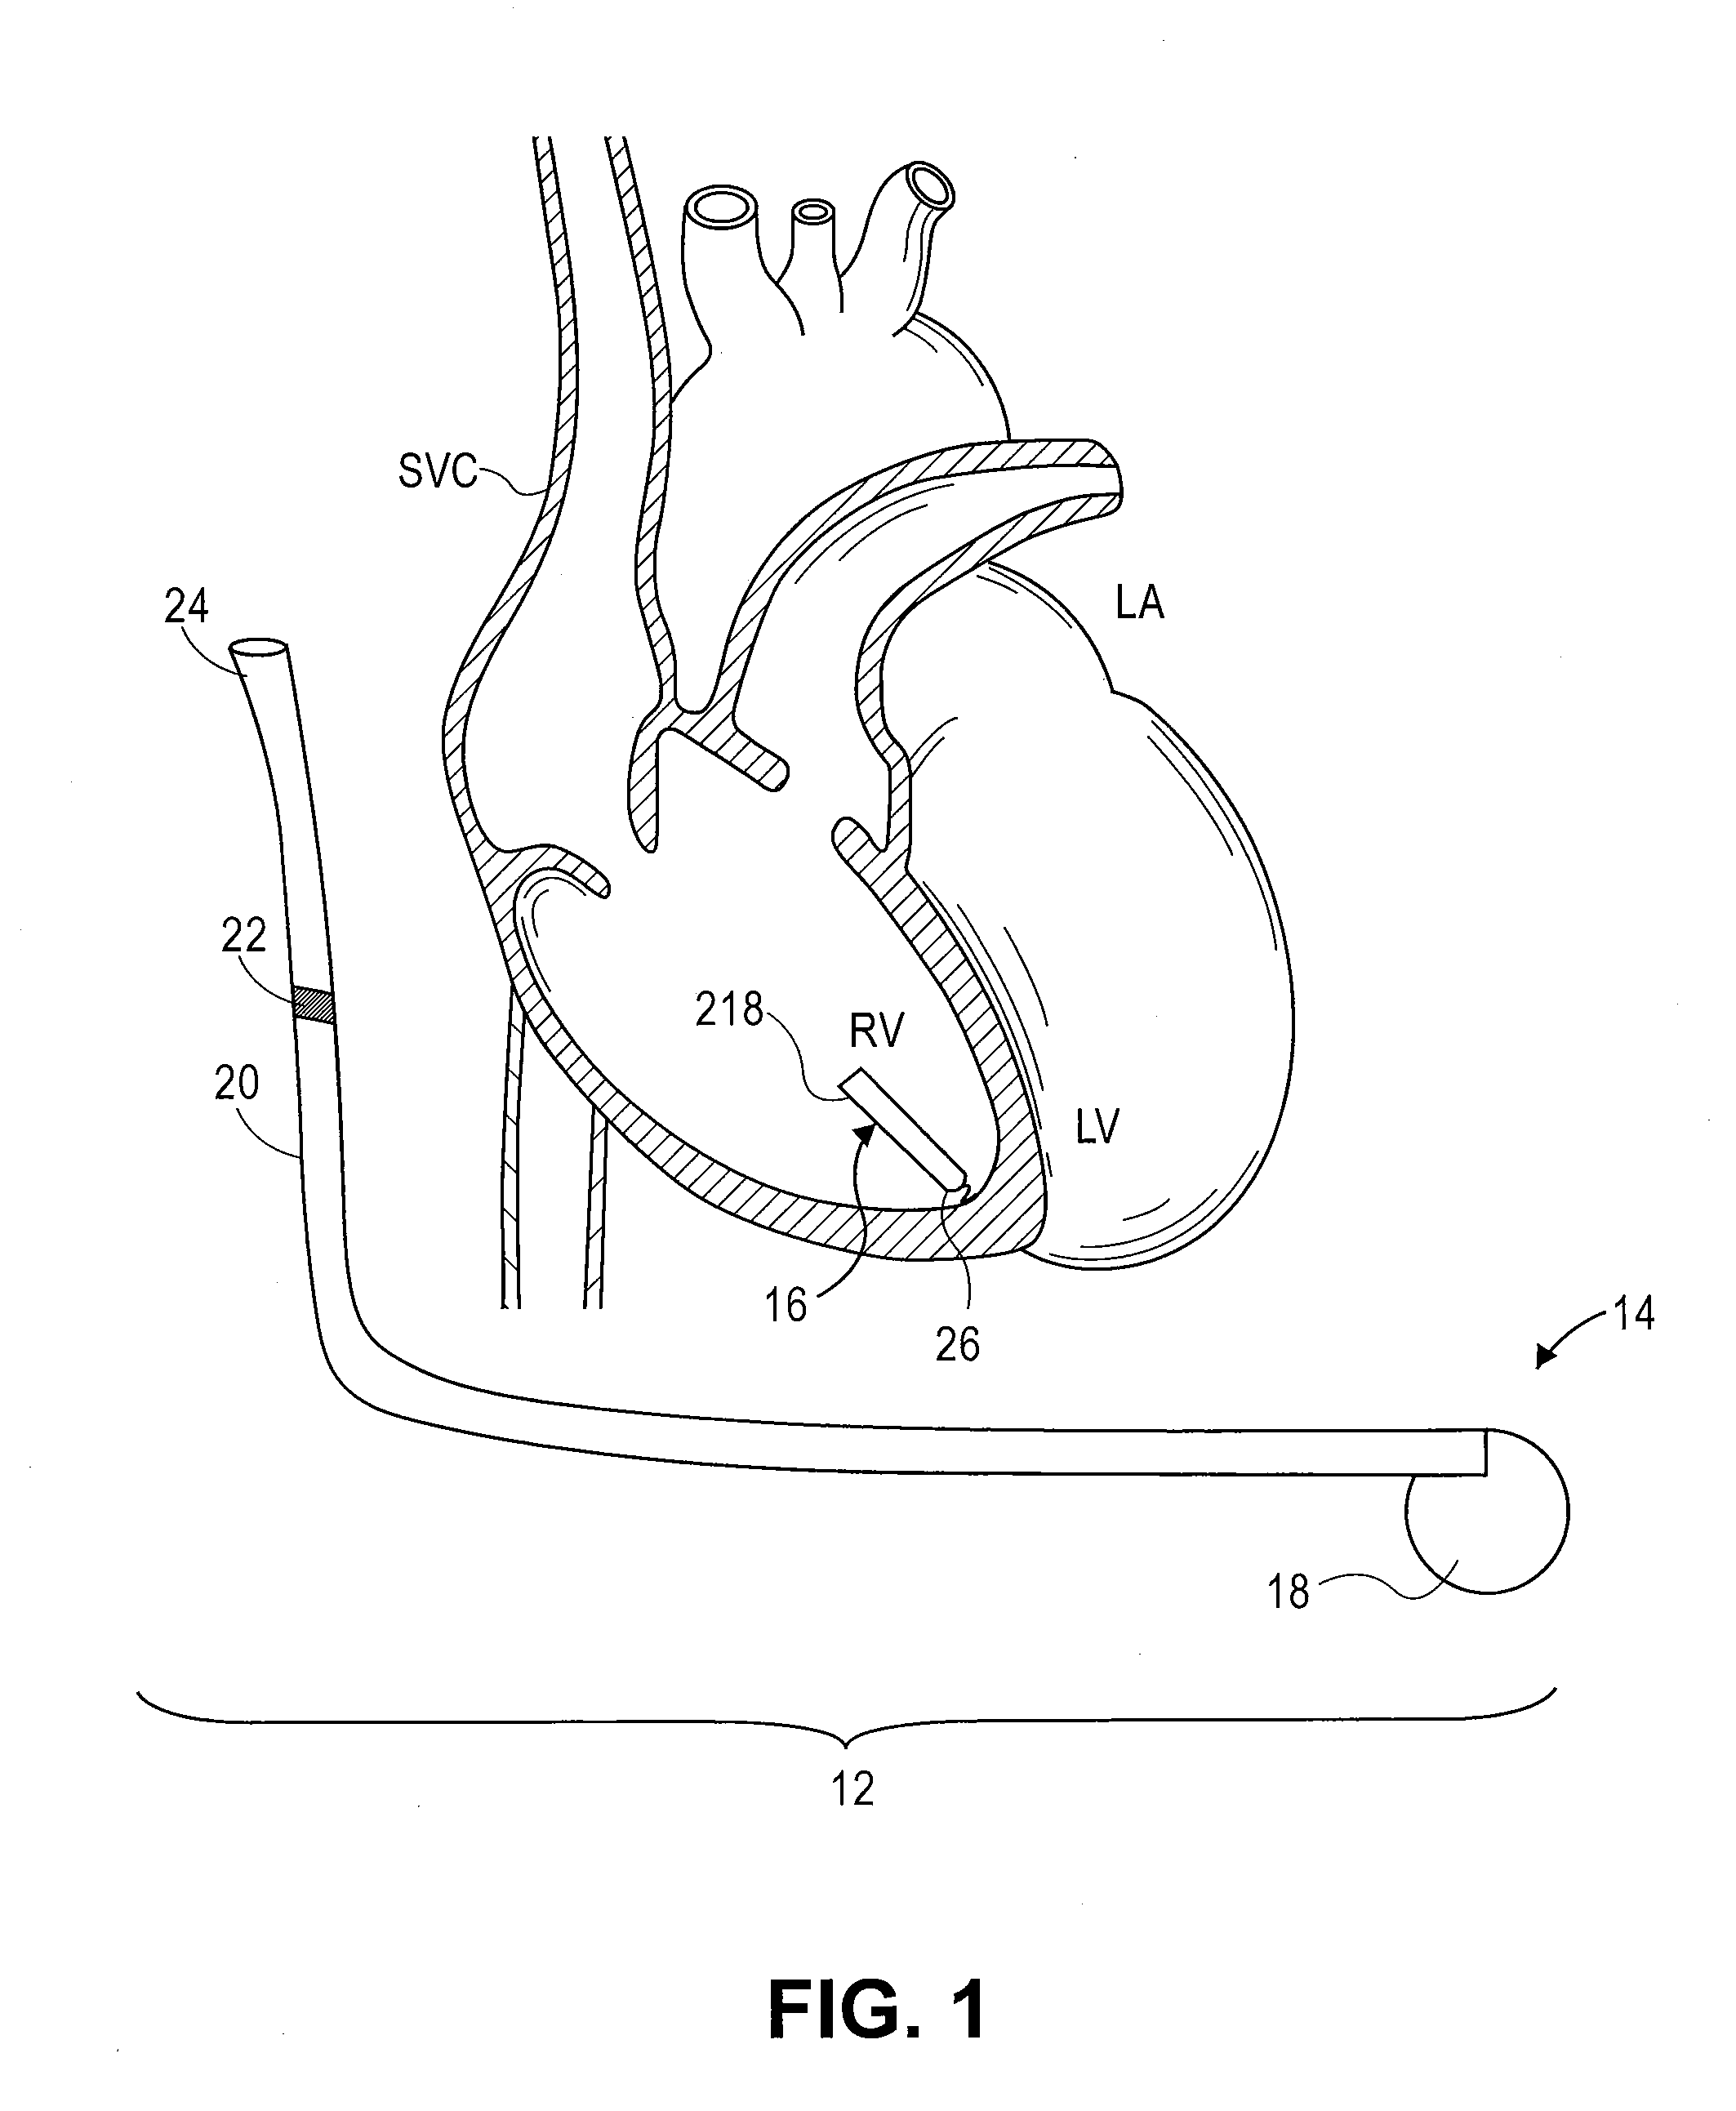 Method and system for tracking events of interest between leadless and subcutaneous implantable cardioverter devices